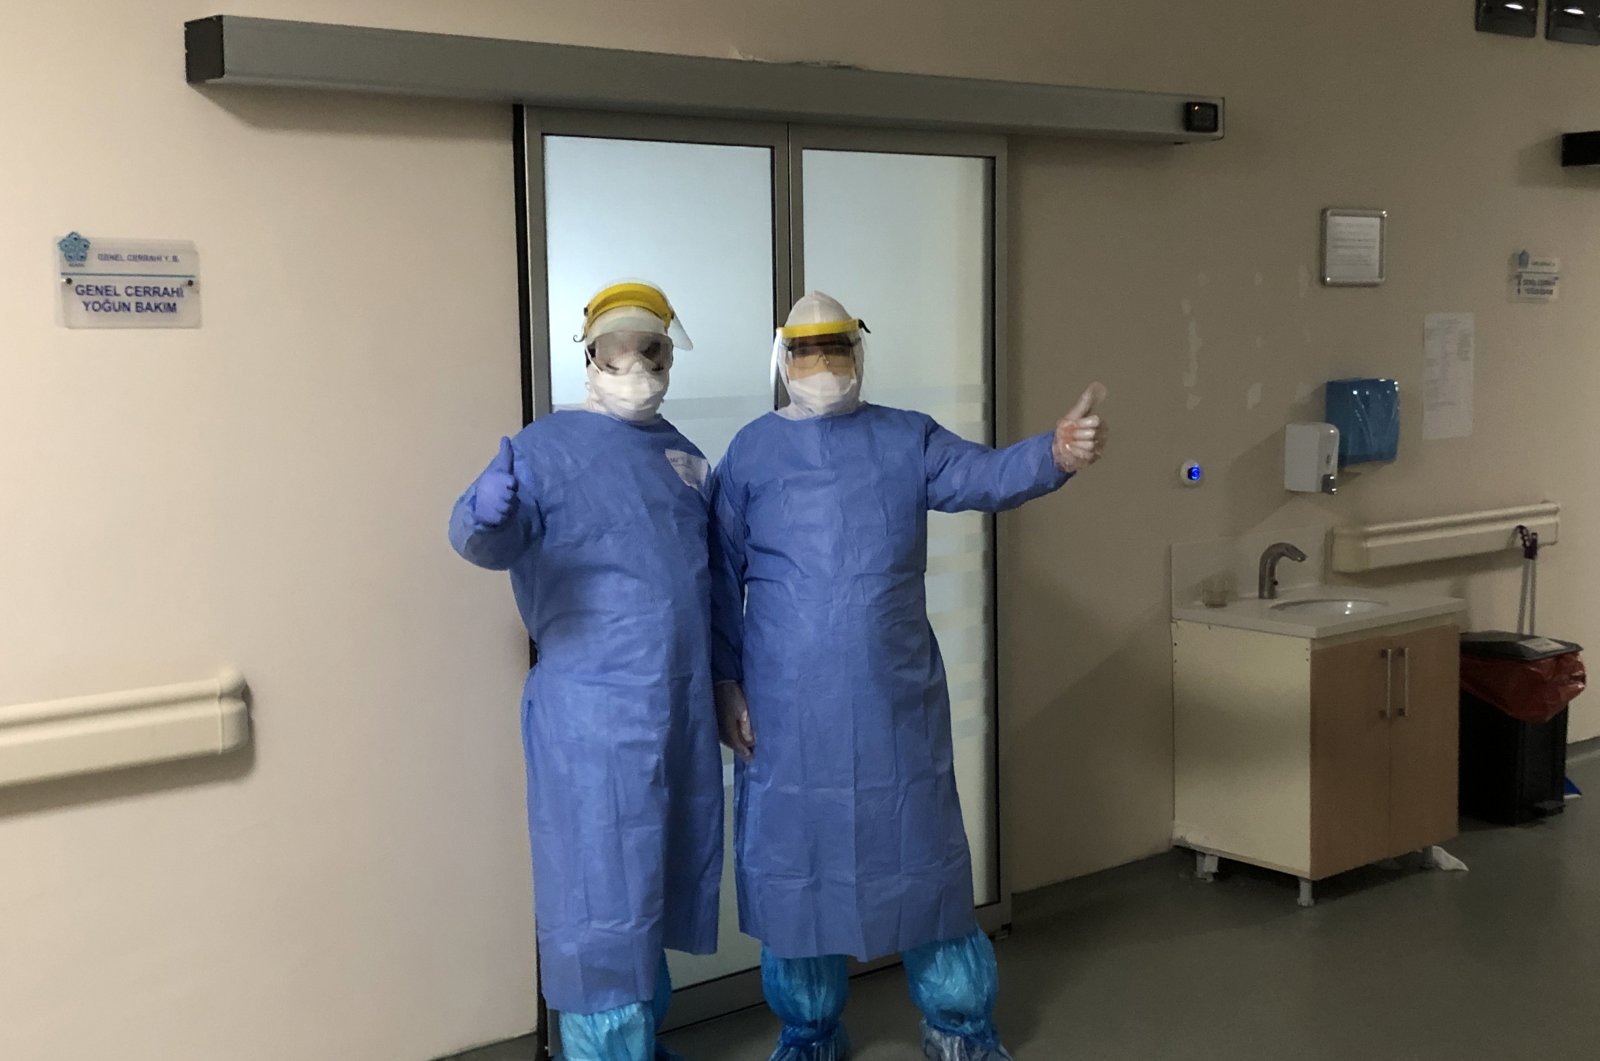 Health care staff wearing protective gearing pose outside an intensive care unit, Konya, Turkey, April 11, 2020. (PHOTO BY HALİT TURAN)